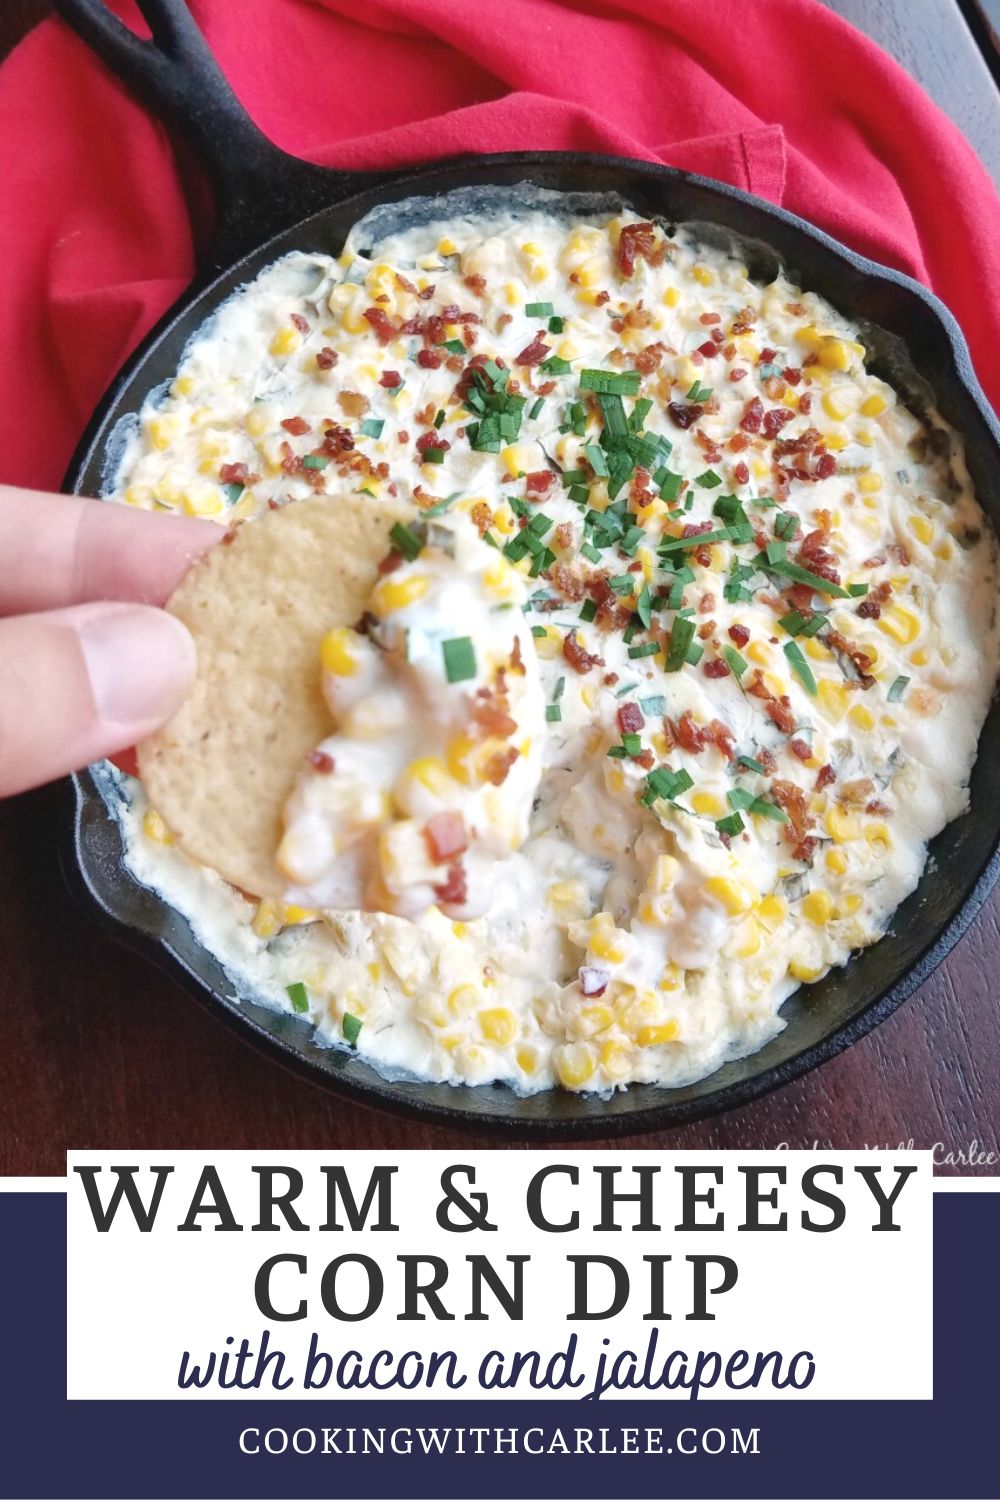 This creamy dip is loaded with corn, bacon and cheese. There is just a bit of spice that adds to the great taste. It is absolutely perfect with tortilla chips. Make it for a BBQ, potluck or party. It is a hit with our crowds every time we serve it!